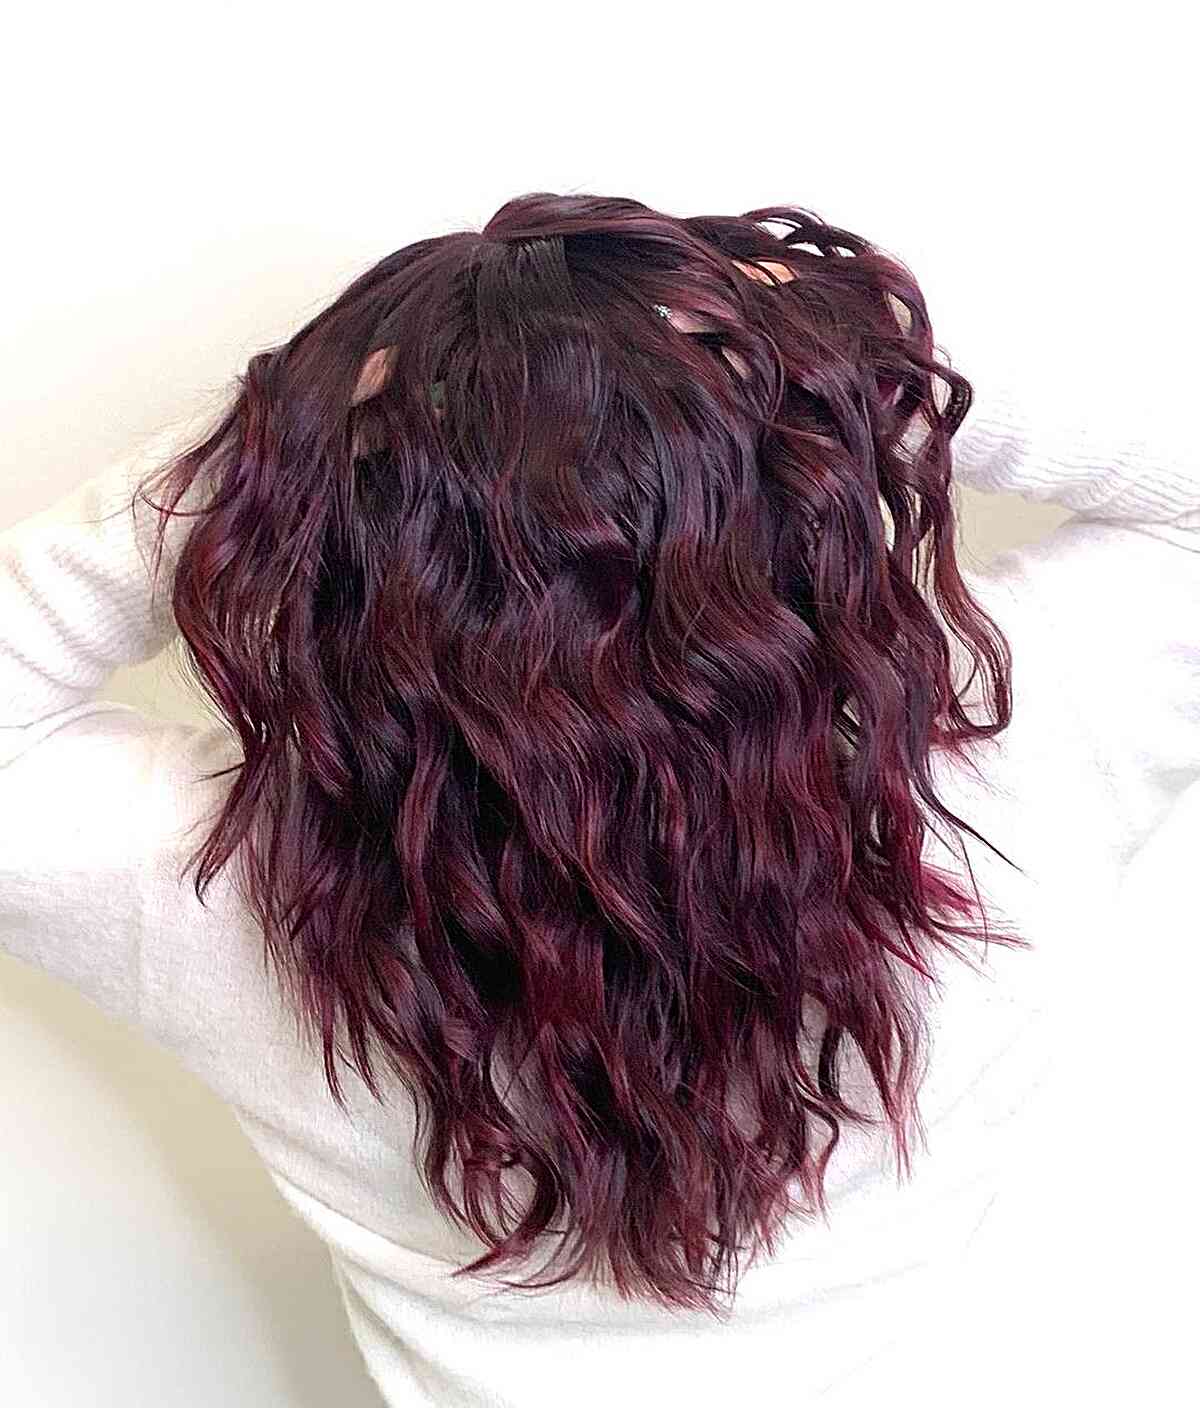 Glossy Burgundy Hair with Mid-Long Wavy Layers